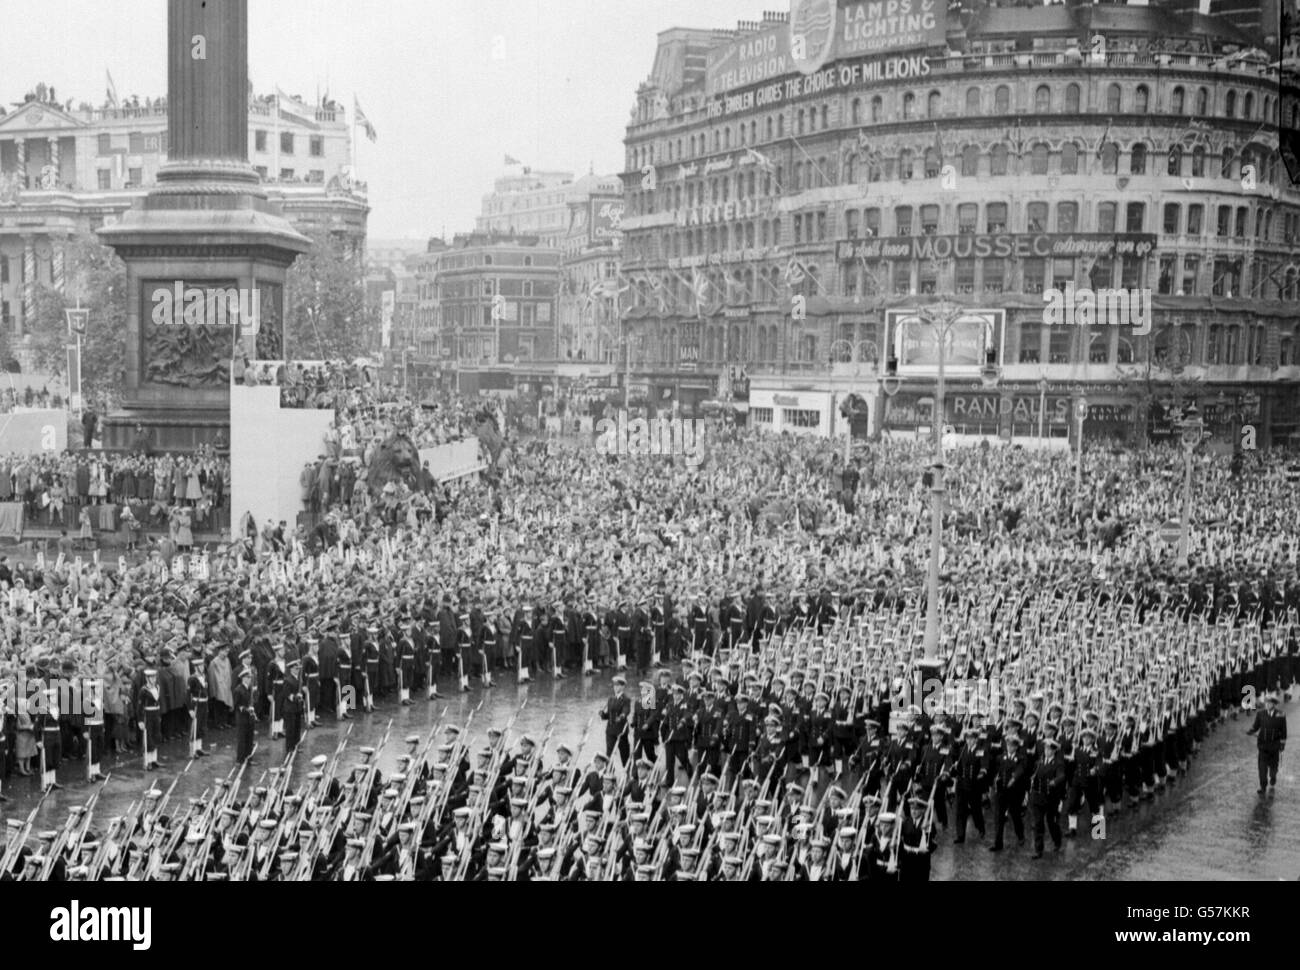 The Royal Navy detachment passes Nelson's Column in Trafalgar Square on the march from Westminster Abbey to Buckingham Palace after the Coronation of Queen Elizabeth II. Stock Photo